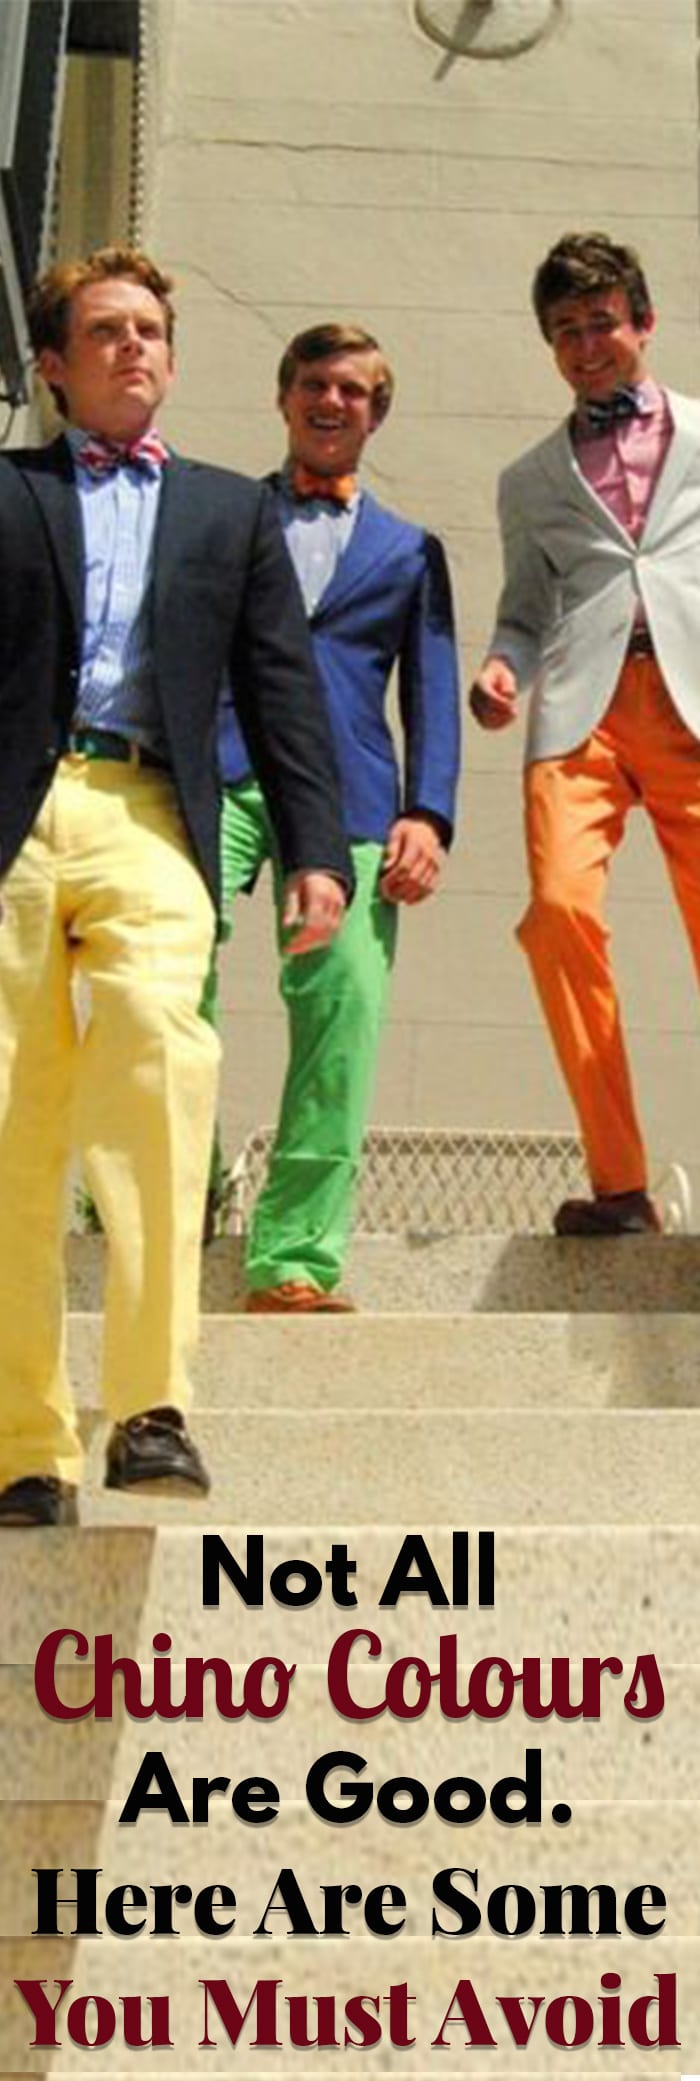 Here Are Some Chino Colours You Must Avoid